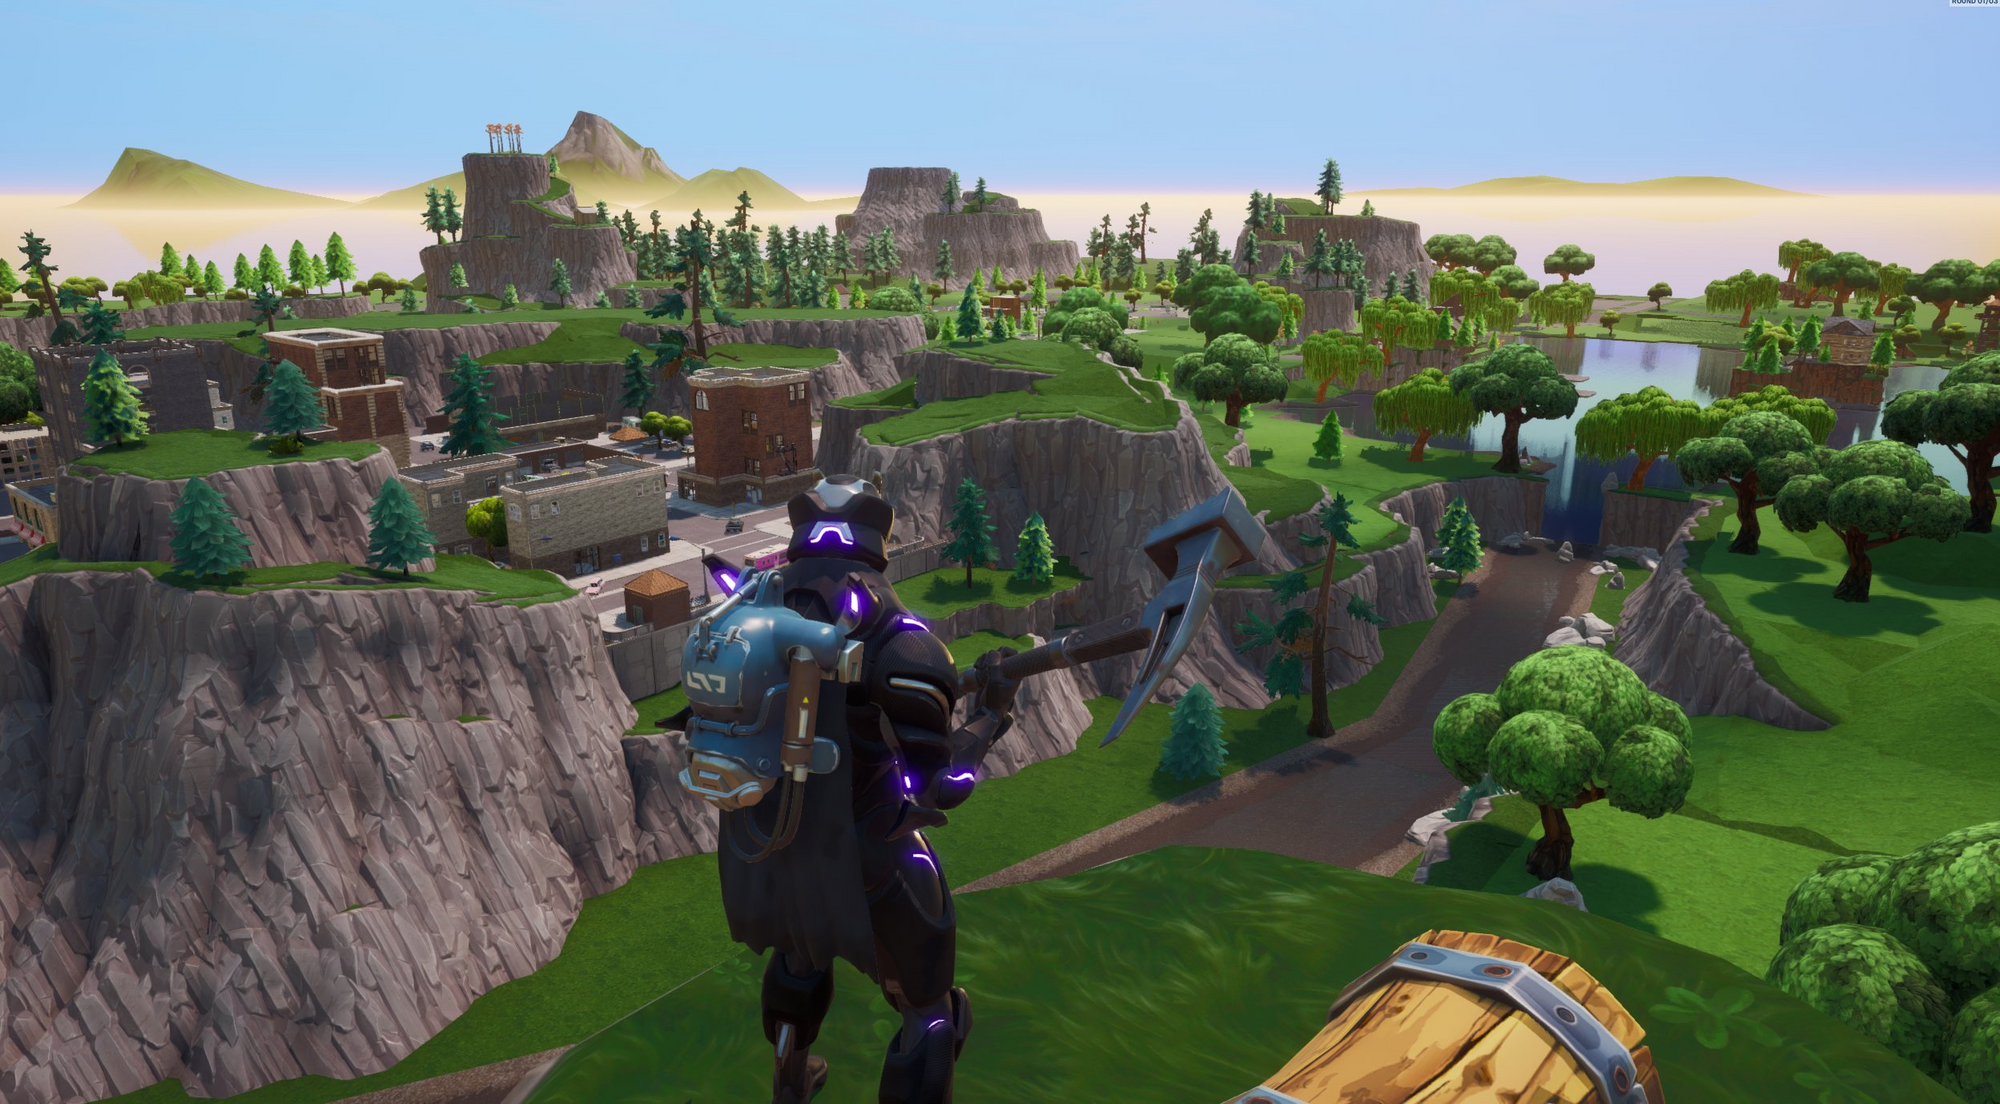 Fortnite Creative Builder recreates entire Chapter 1 Map